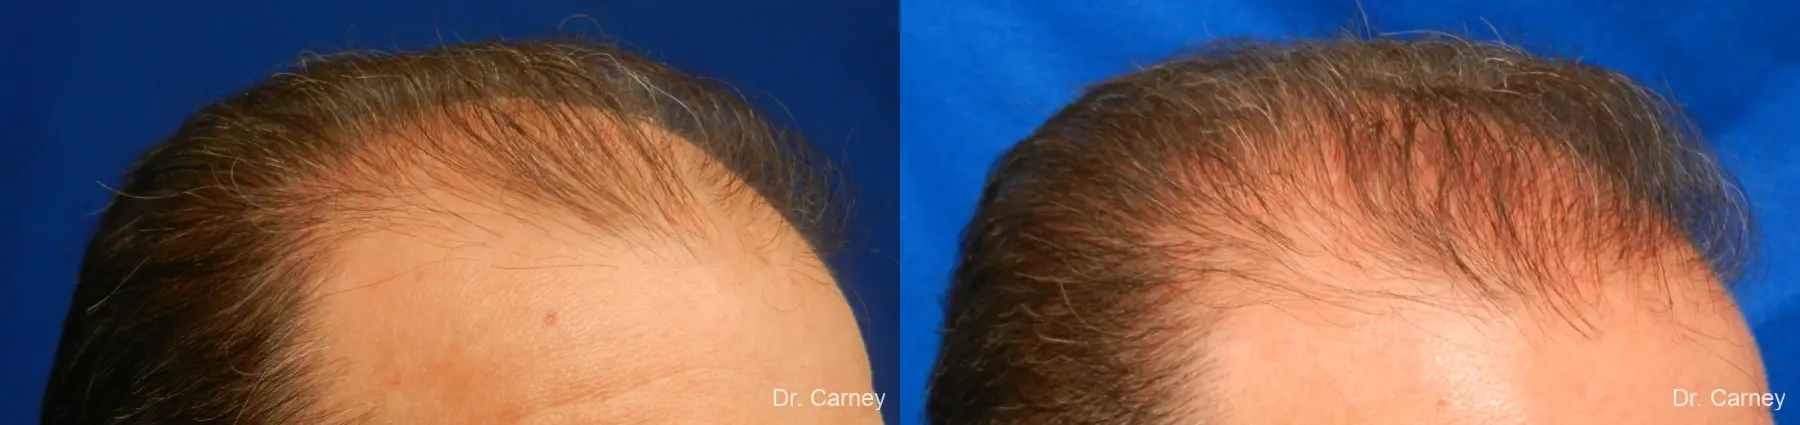 Hair Transplantation: Patient 16 - Before and After 3